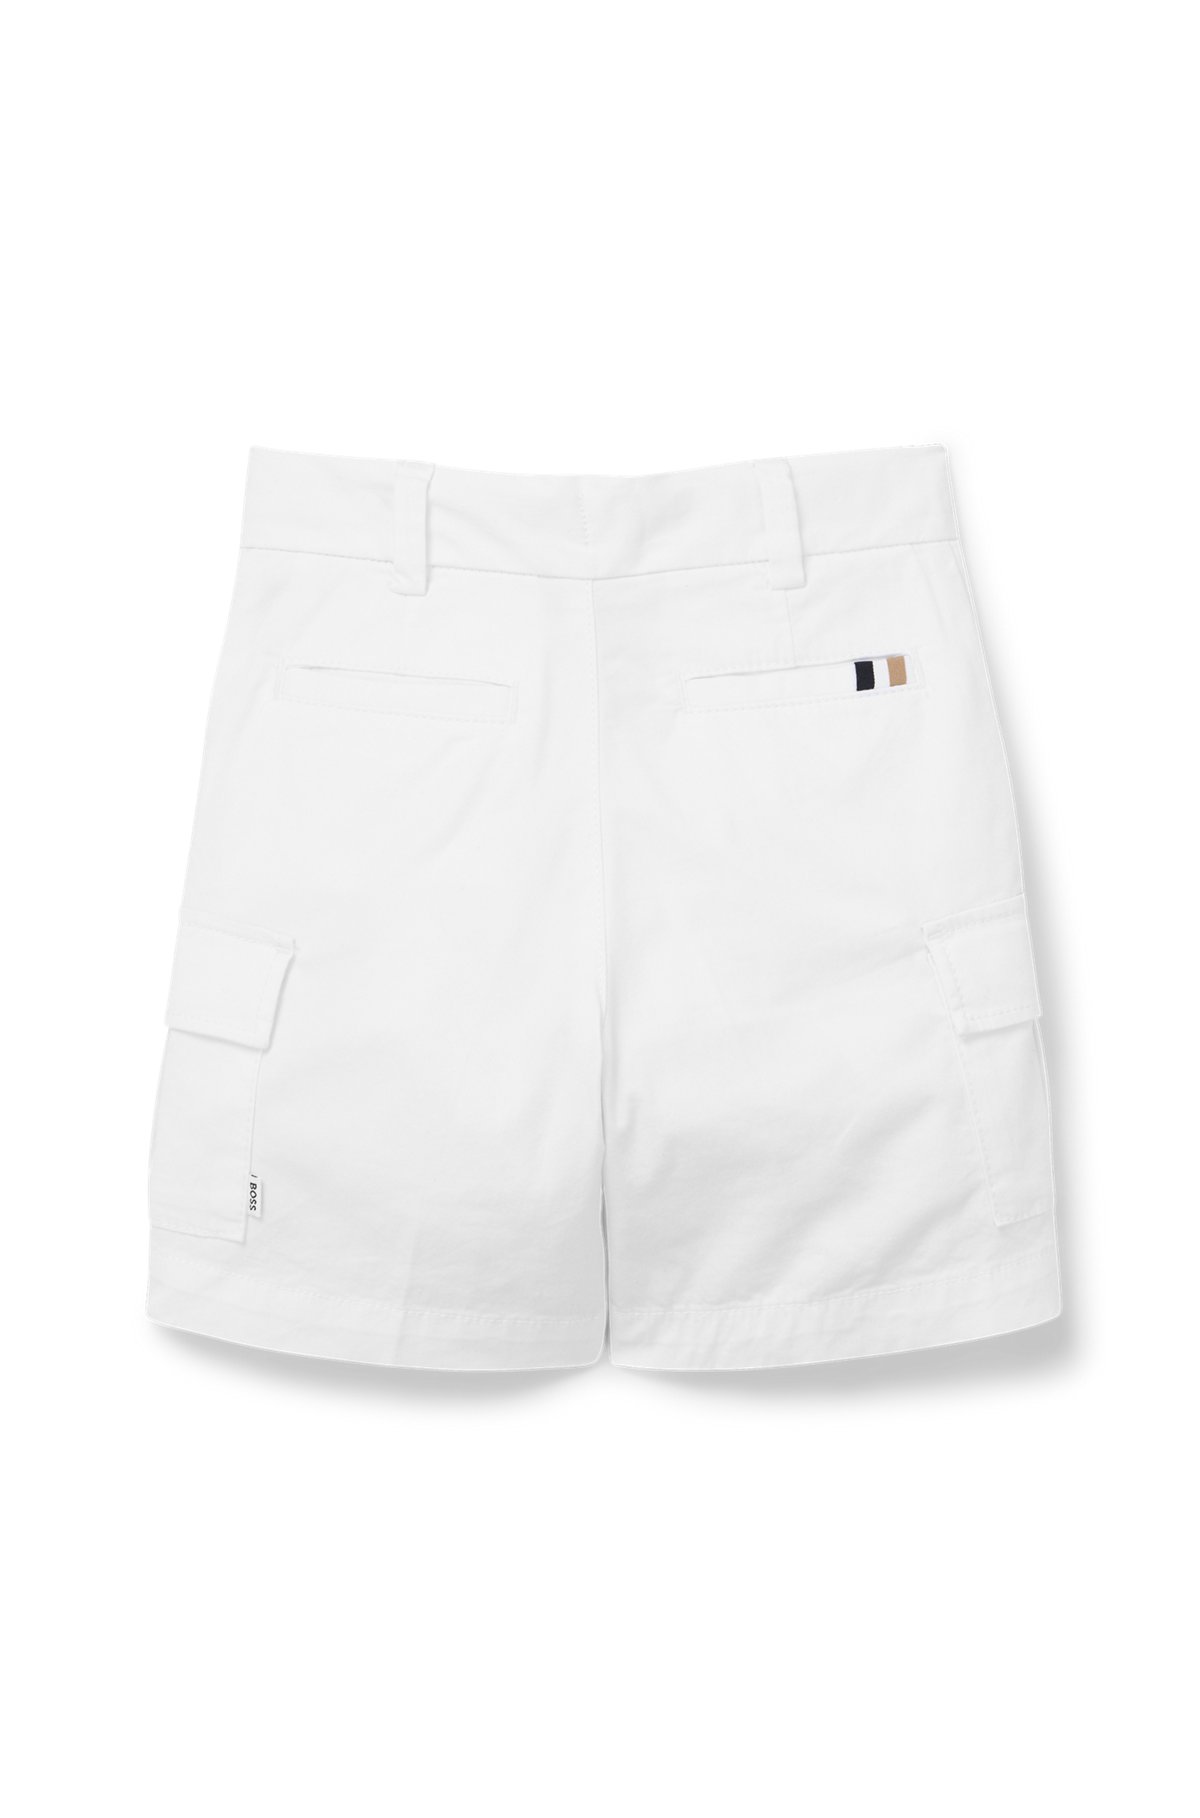 Kids' shorts in cotton twill with cargo pockets, White